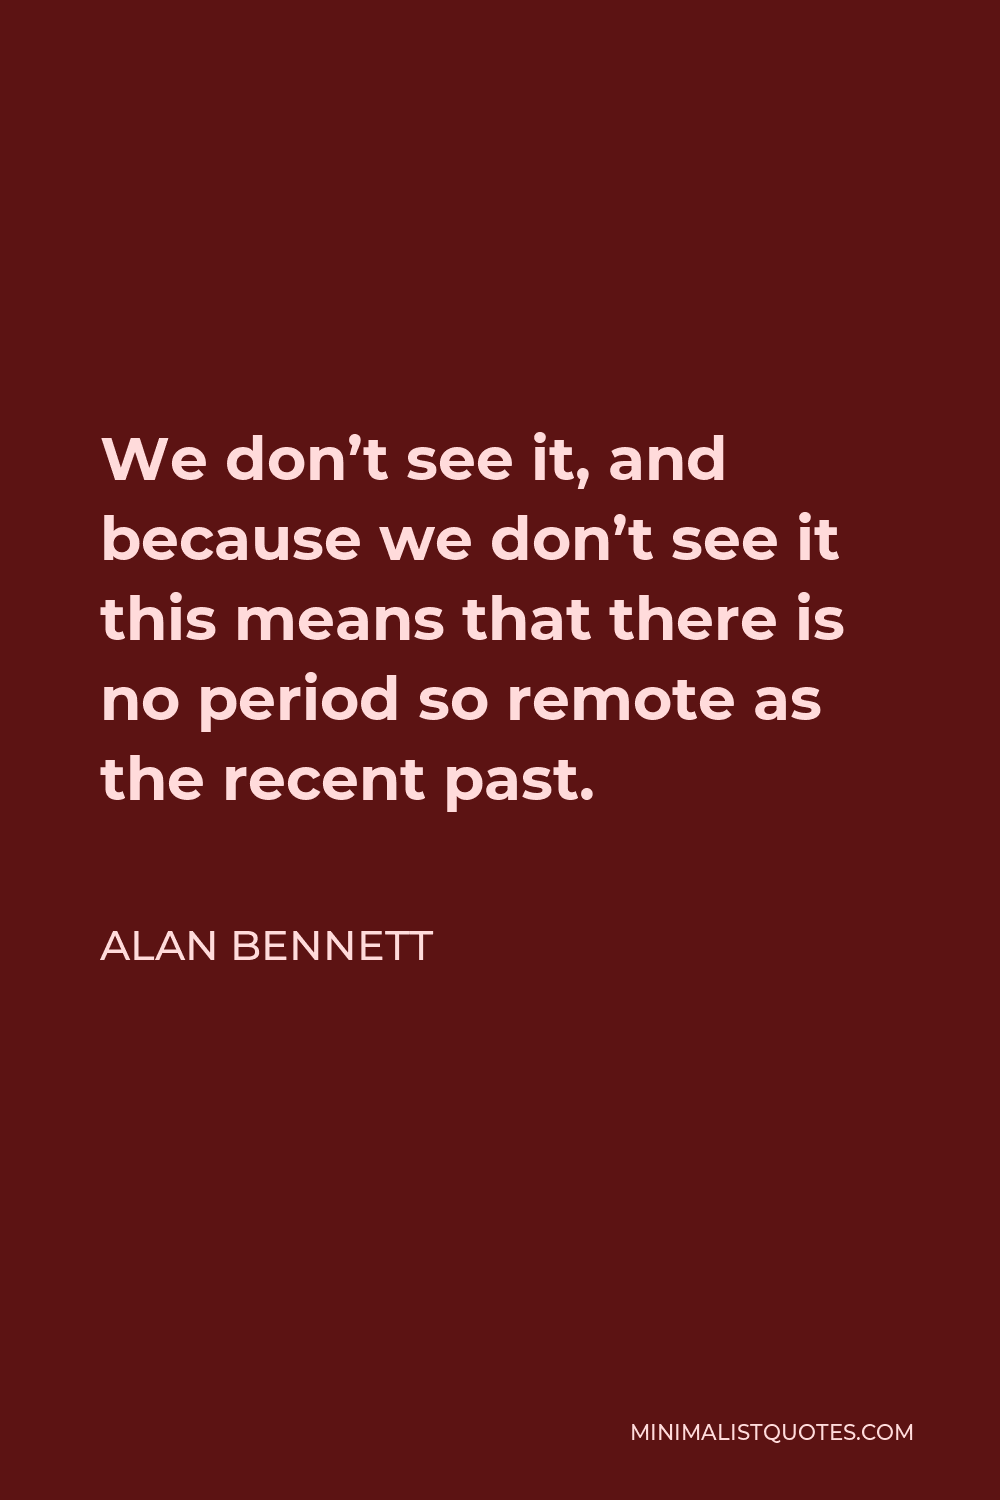 Alan Bennett Quote - We don’t see it, and because we don’t see it this means that there is no period so remote as the recent past.